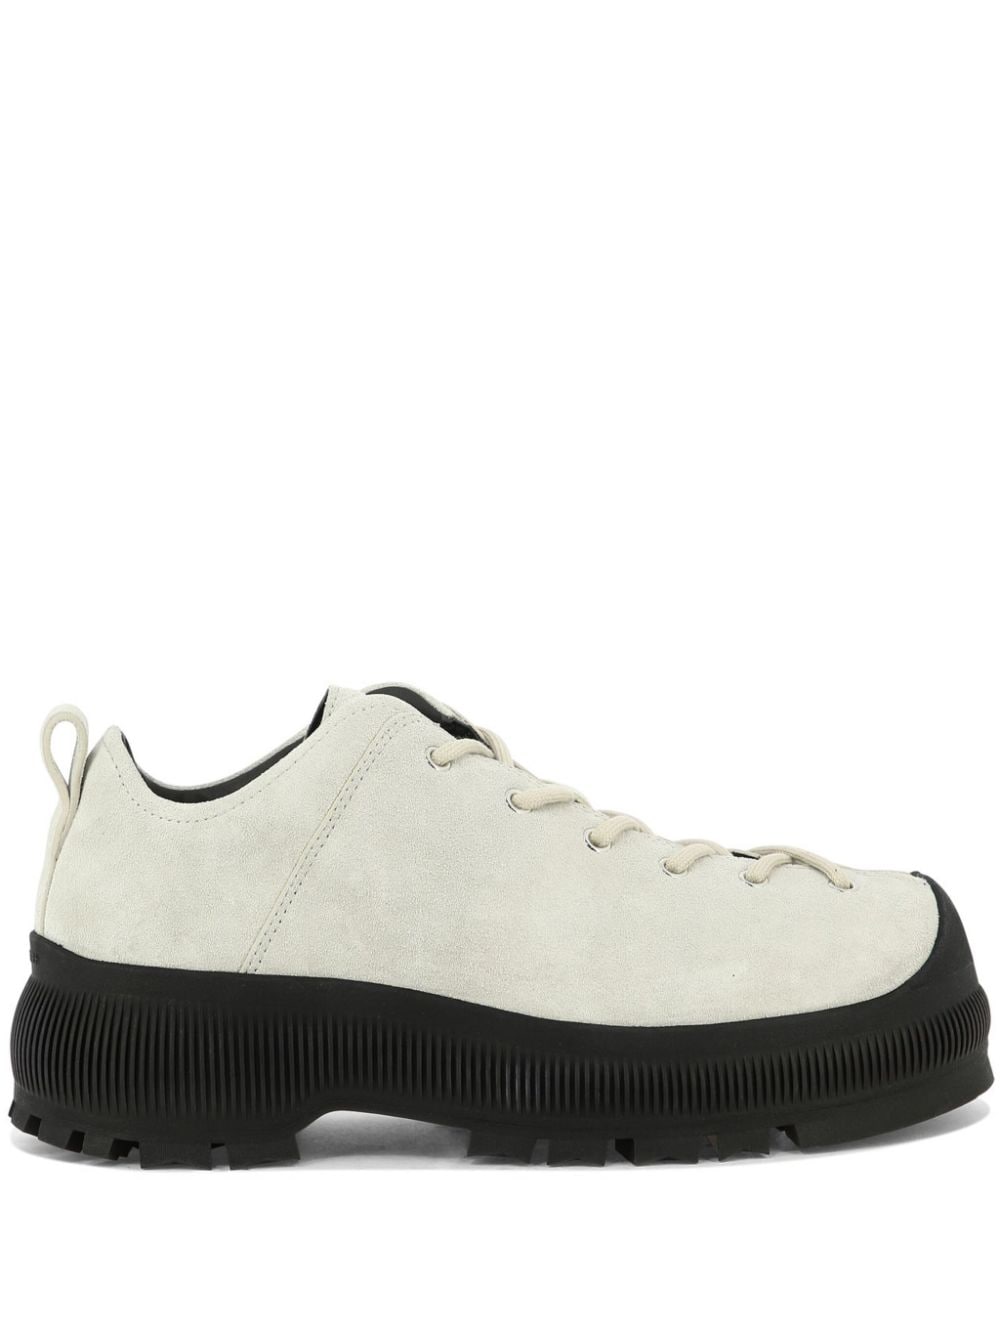 Jil Sander Lace-up Suede Hiking Boots In Neutrals